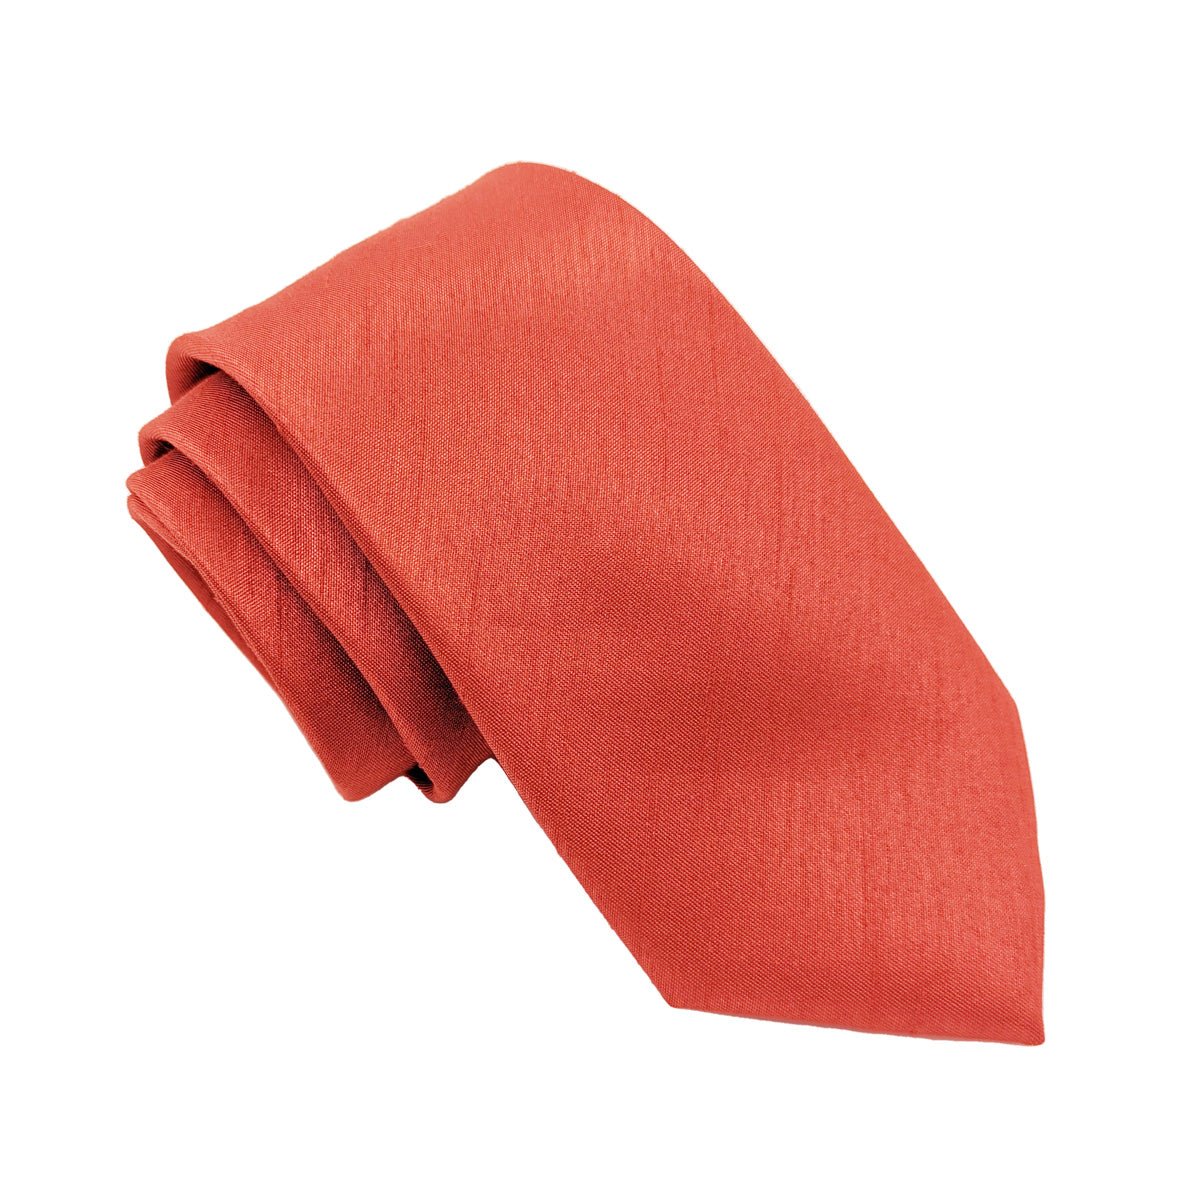 Maple Shantung Boys Ties - Childrenswear - Self-Tie - Swagger & Swoon